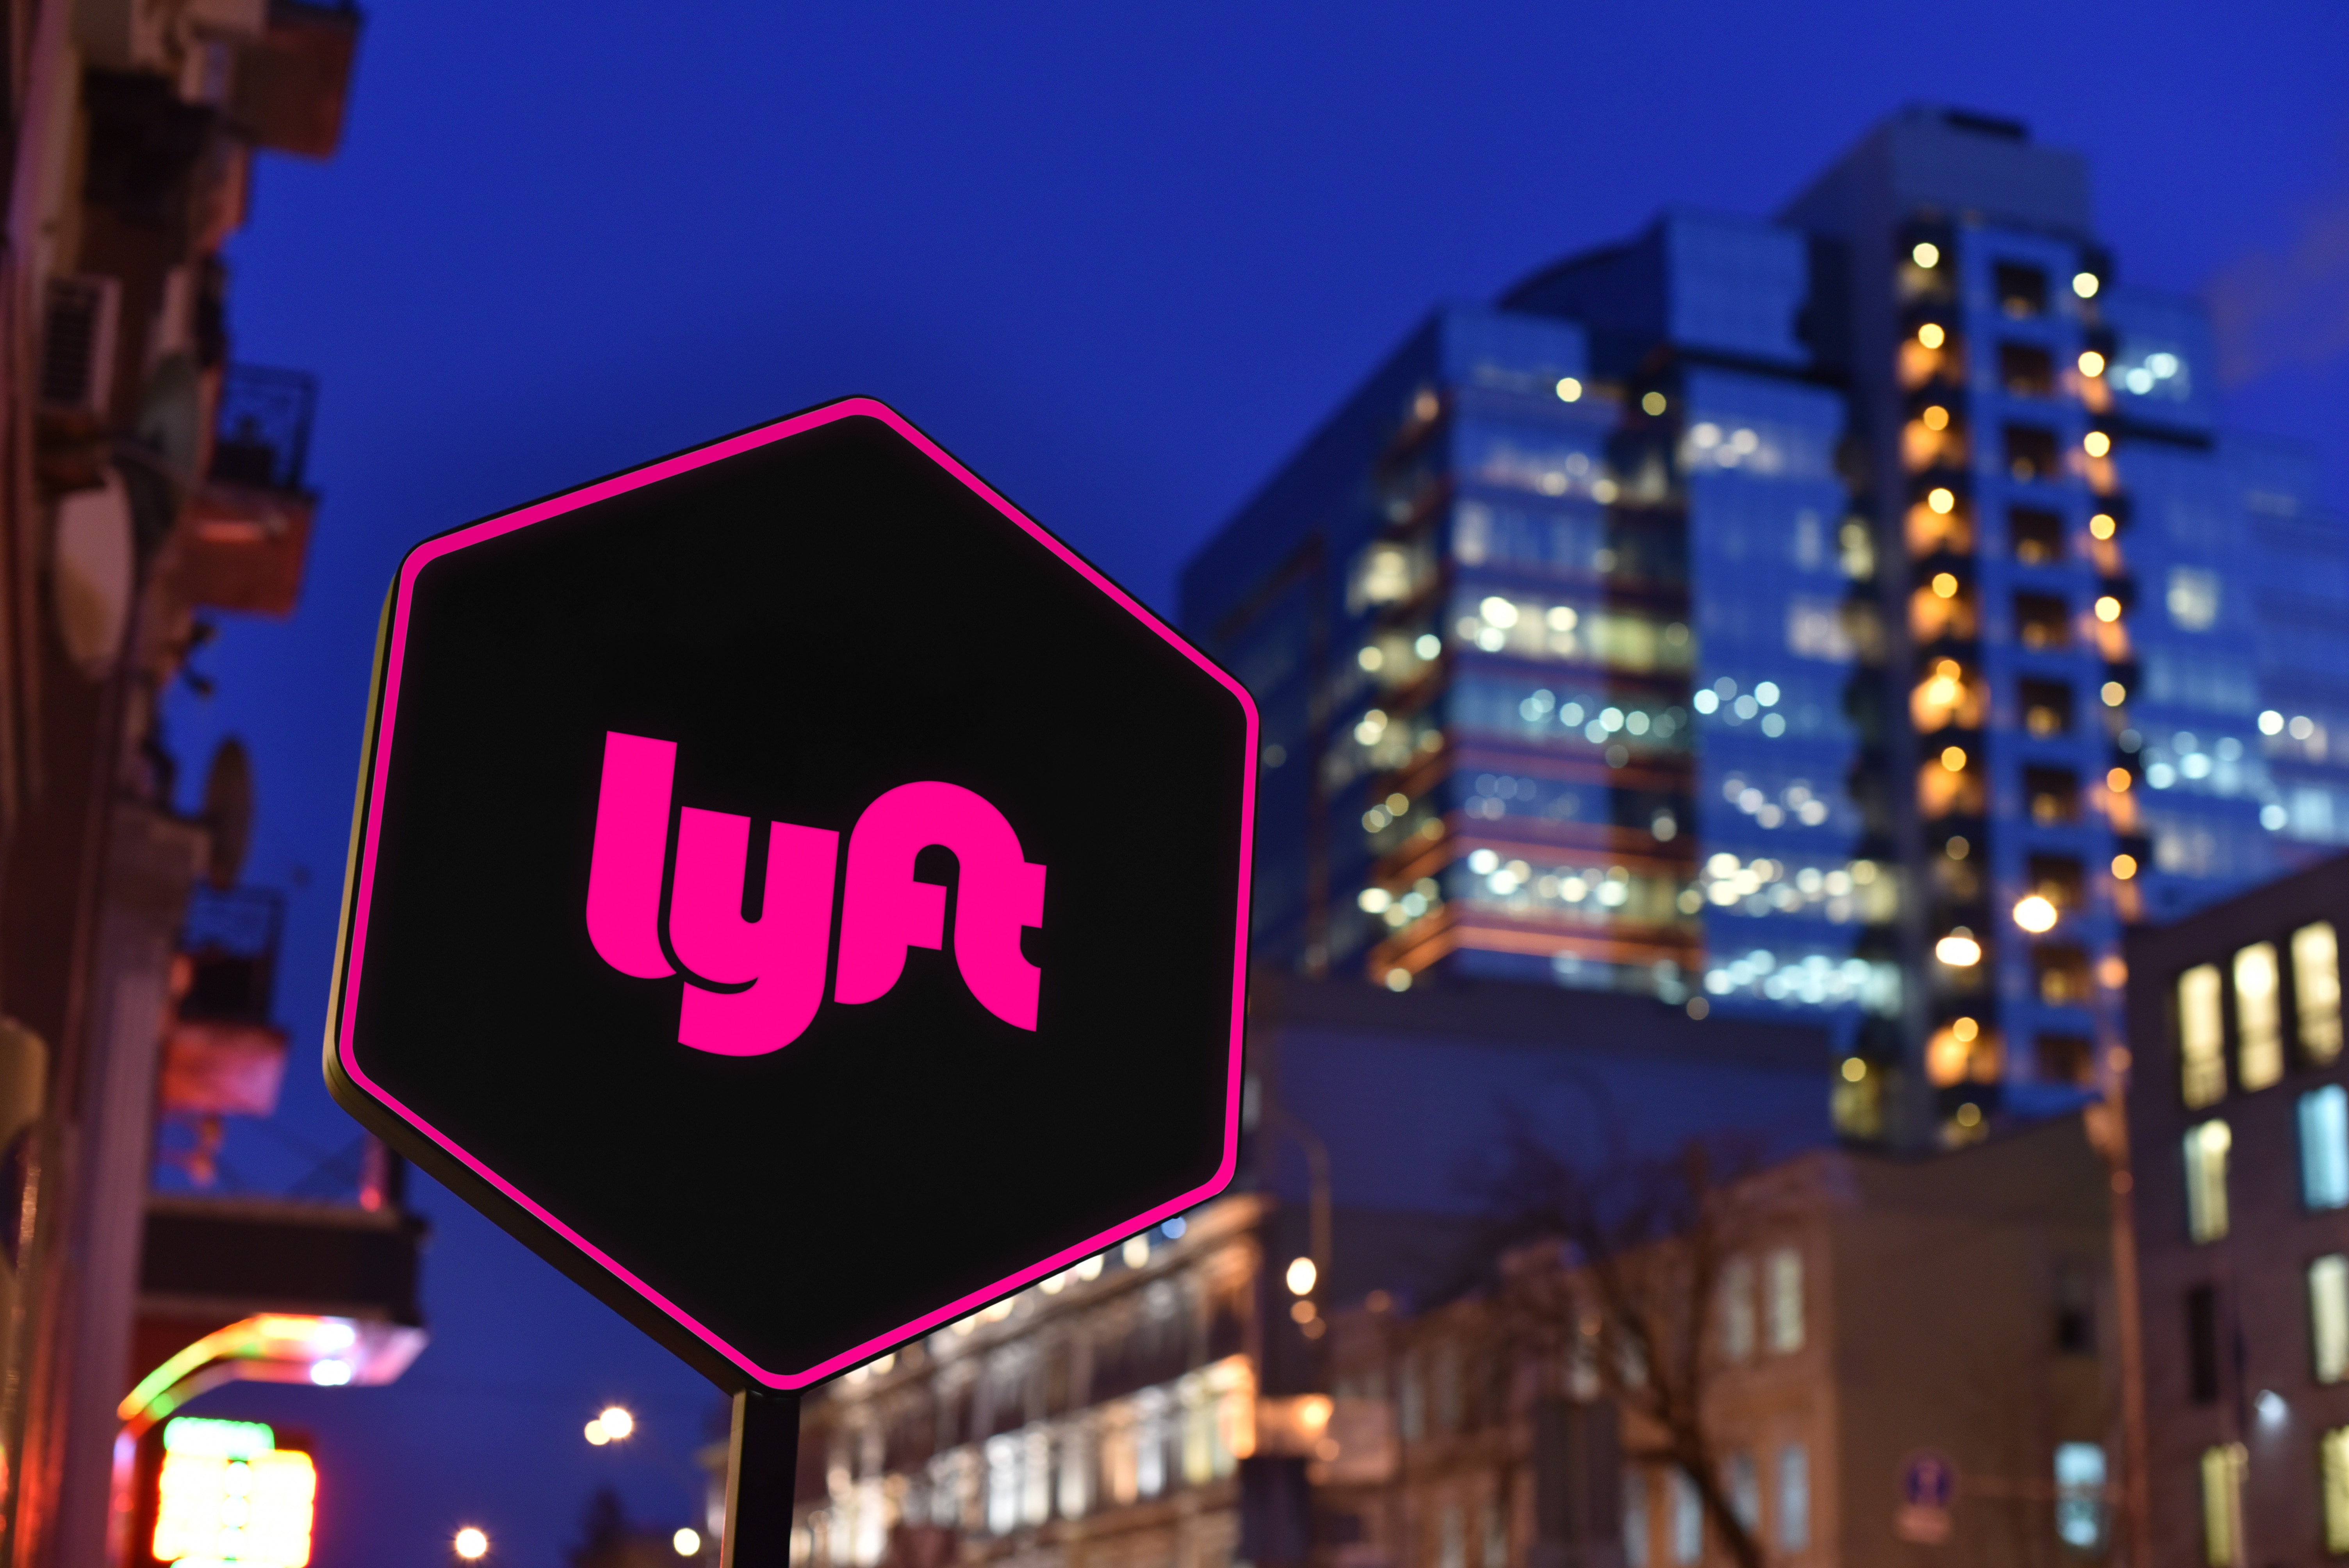 Why Lyft's Quarter-To-Quarter 'Bumpiness' Could Hurt Stock: 7 Analysts Break Down Q3 Earnings